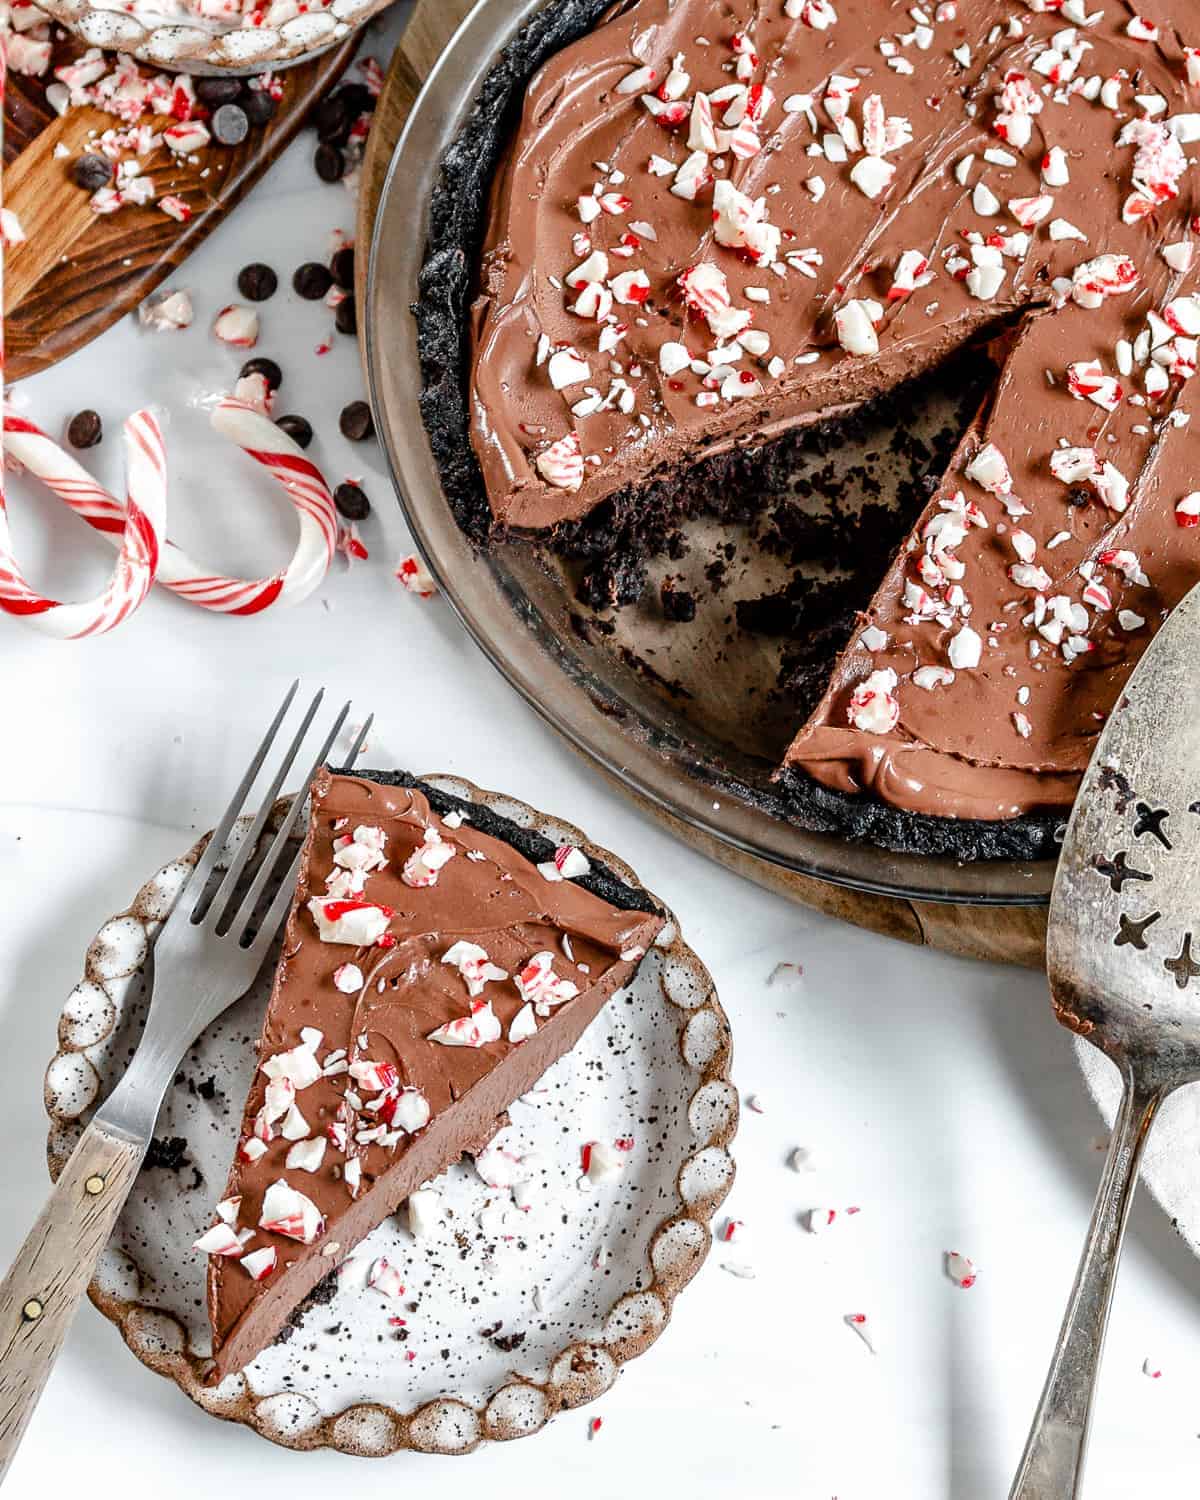 vegan chocolate peppermint pie made with silken tofu. The pie is served on a platter with a slice cut out of it, the slice it on a small white plate next to it and decorated with vegan candy cane pieces